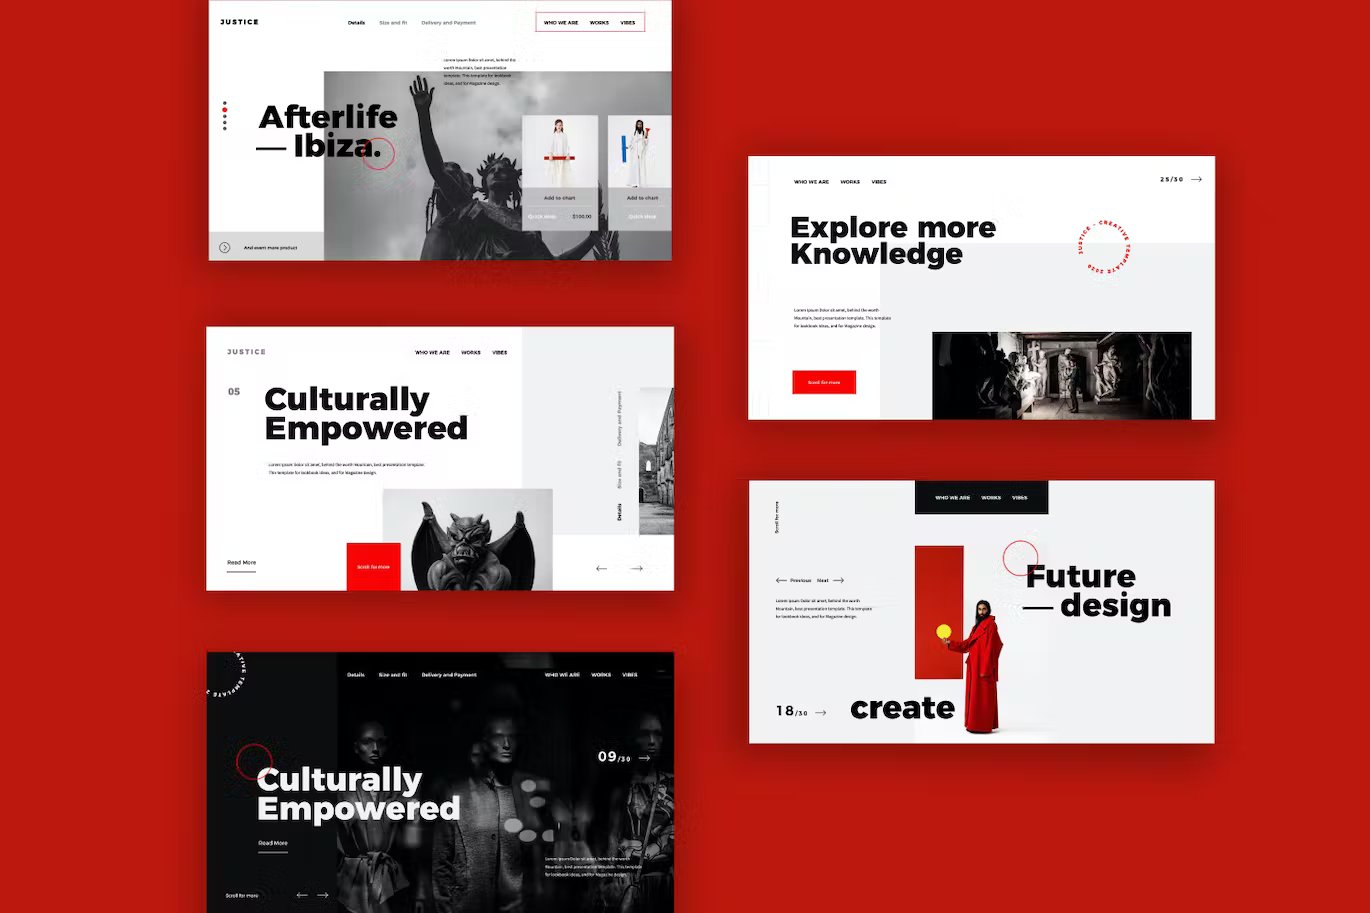 Beautiful red background slides.